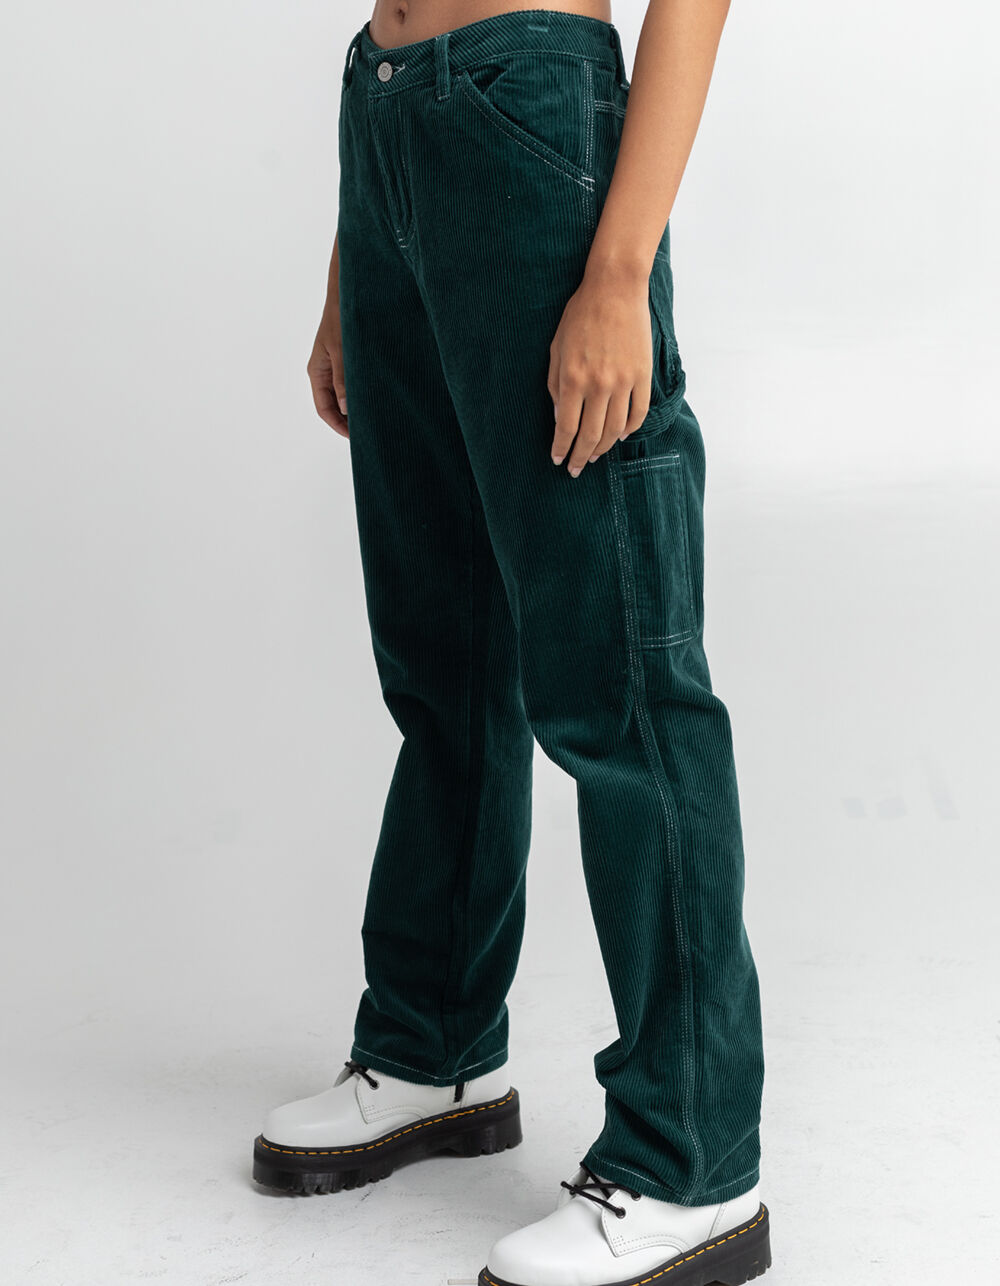 Details more than 154 green cord trousers best - camera.edu.vn